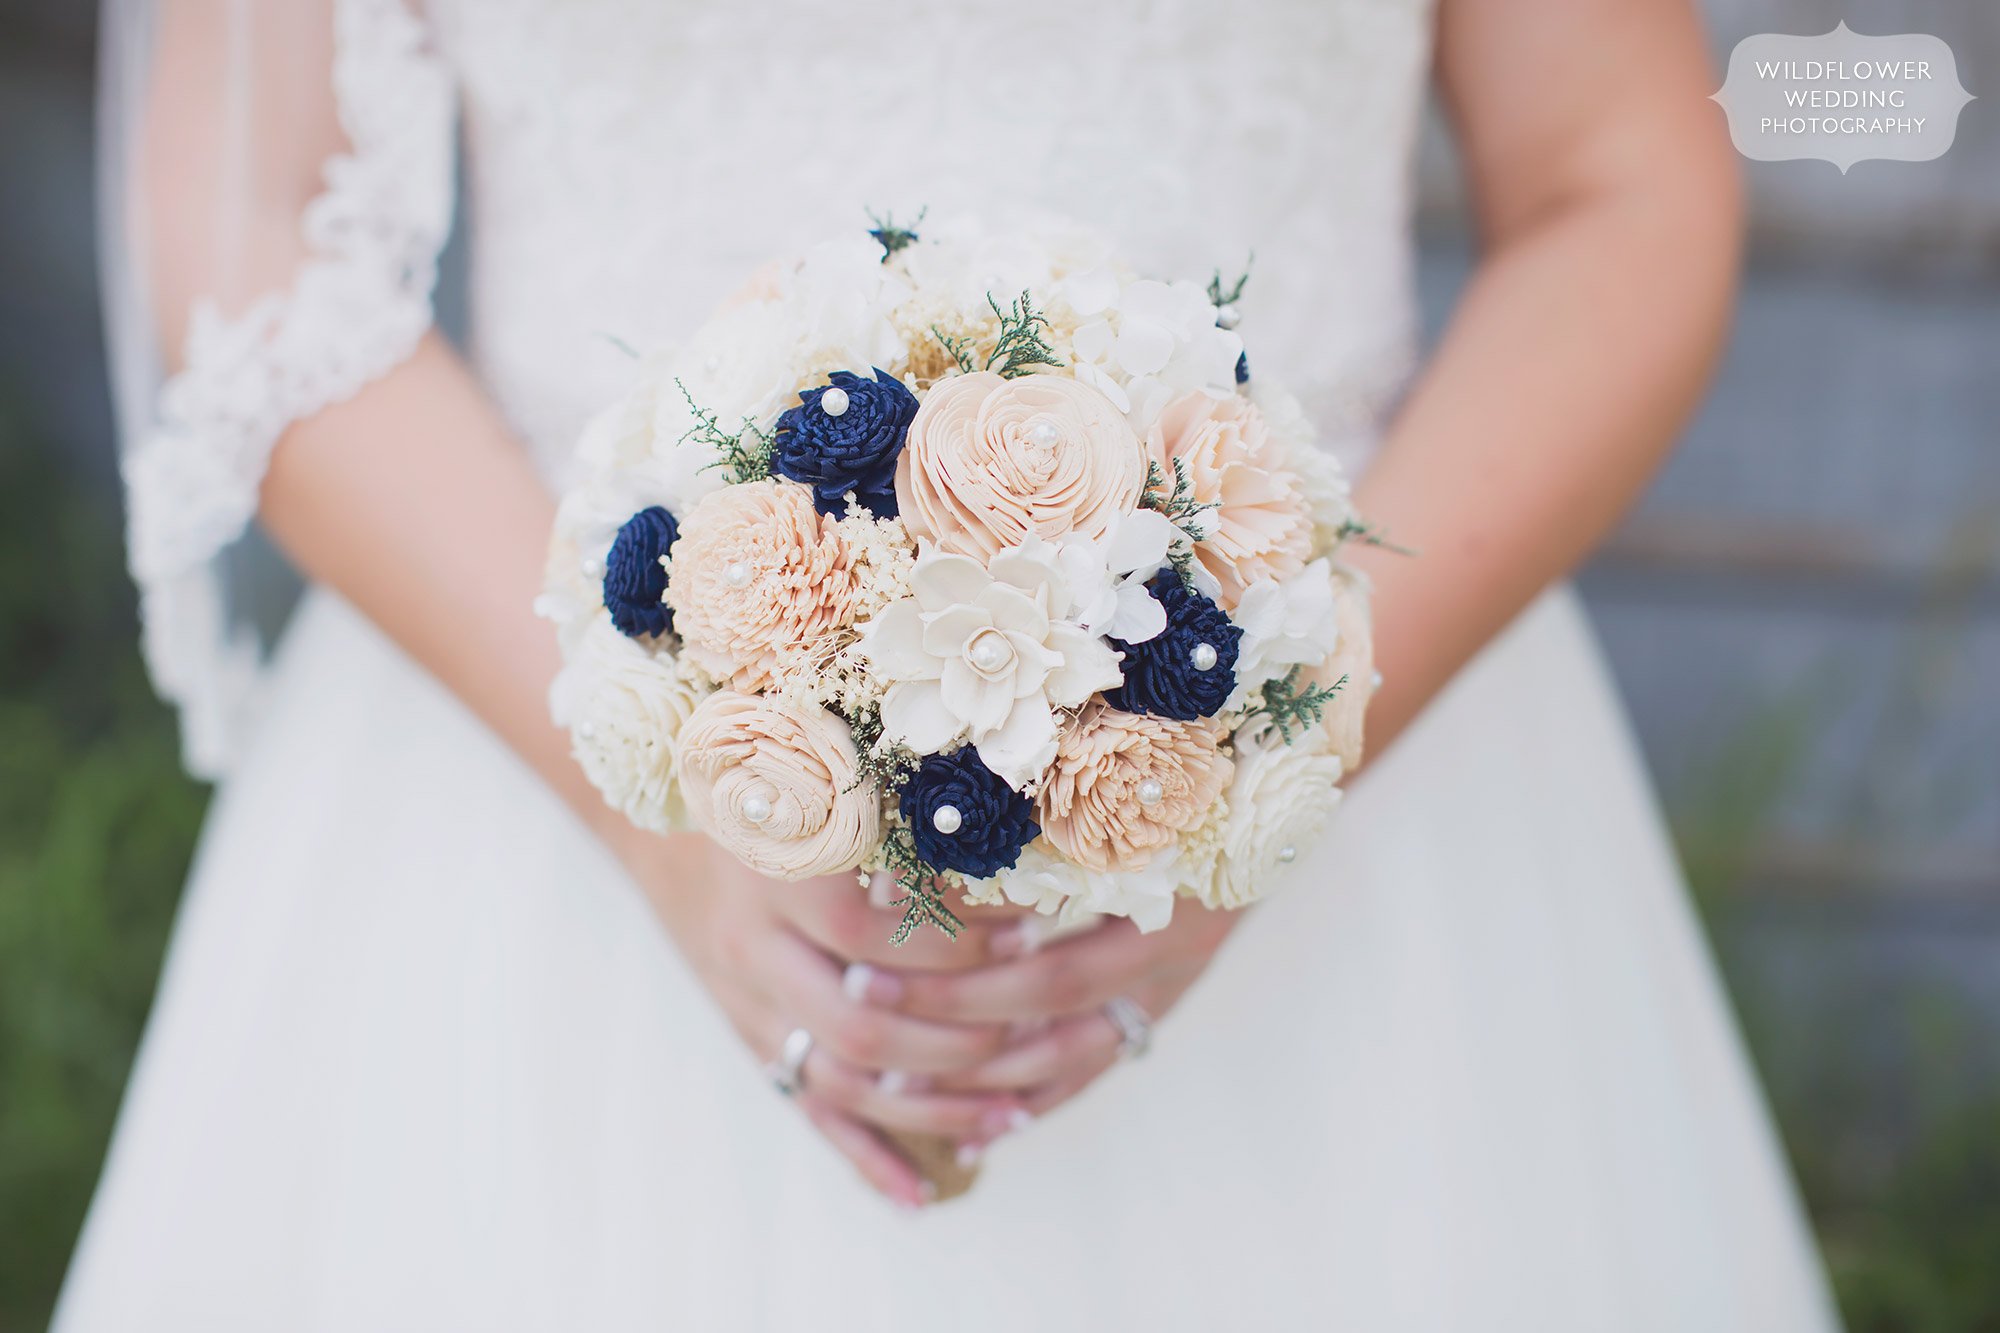 This wooden flower wedding bouquet is perfect for a country wedding in Columbia, MO at Bradford Farm.